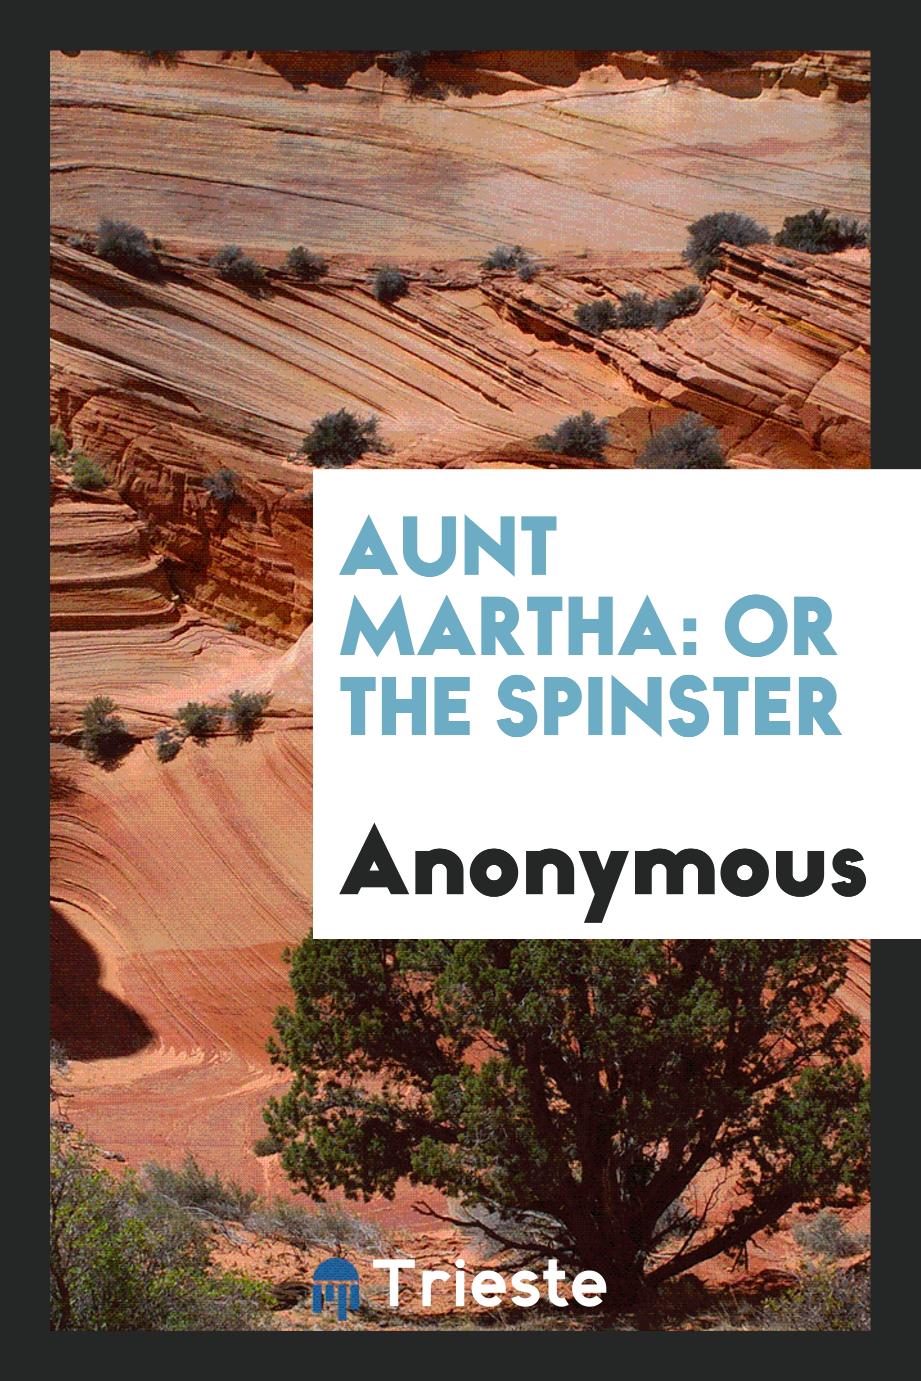 Aunt Martha: or the spinster